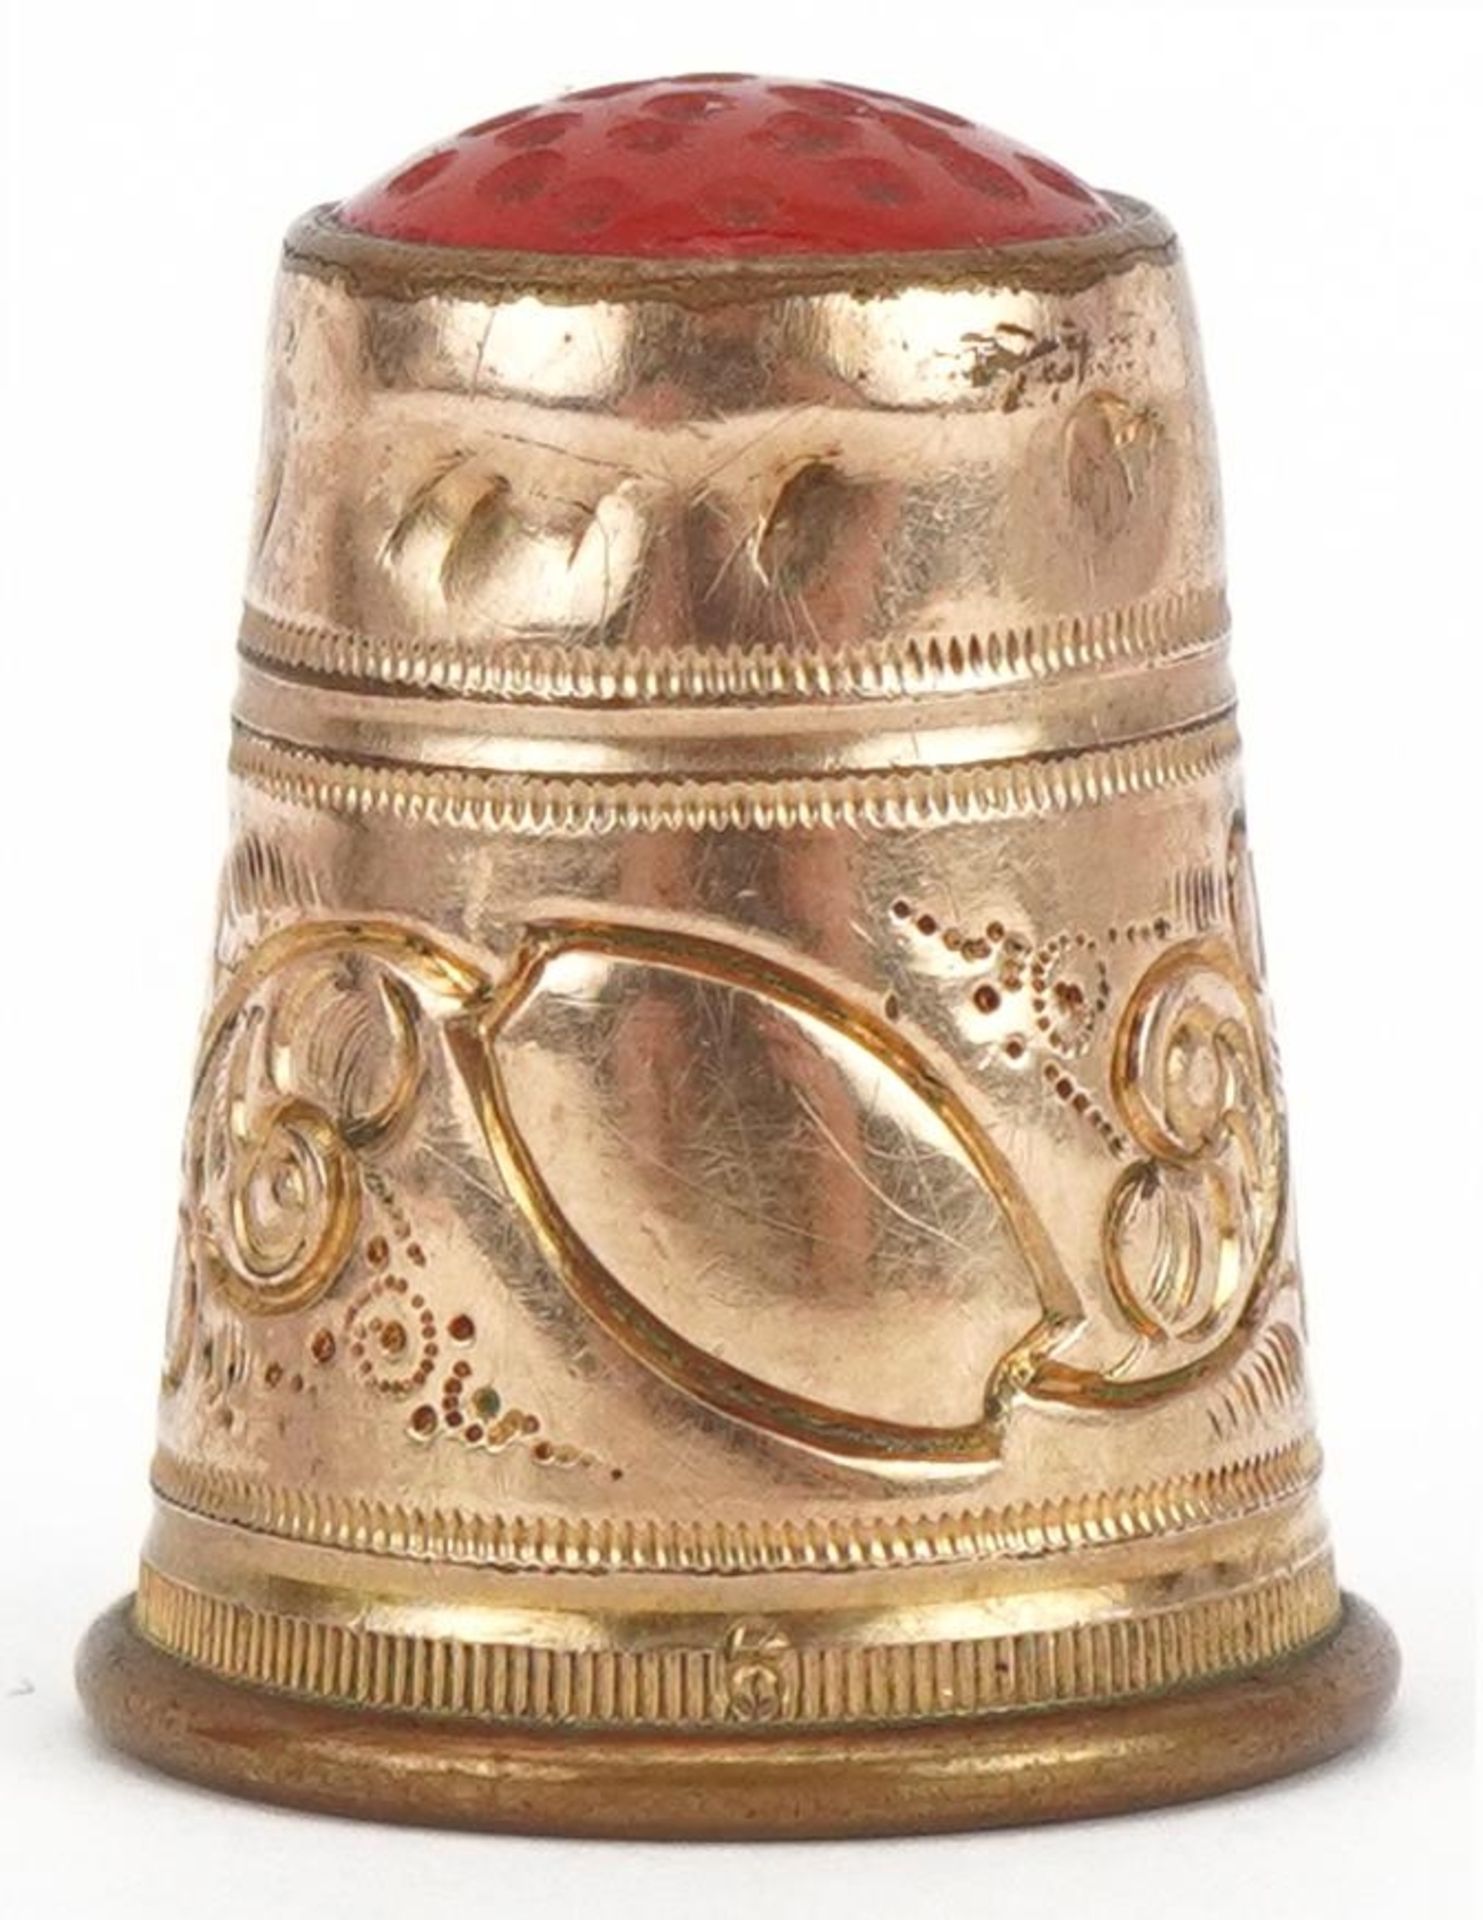 Yellow metal thimble with hardstone top, 2cm high, 3.7g : For further information on this lot please